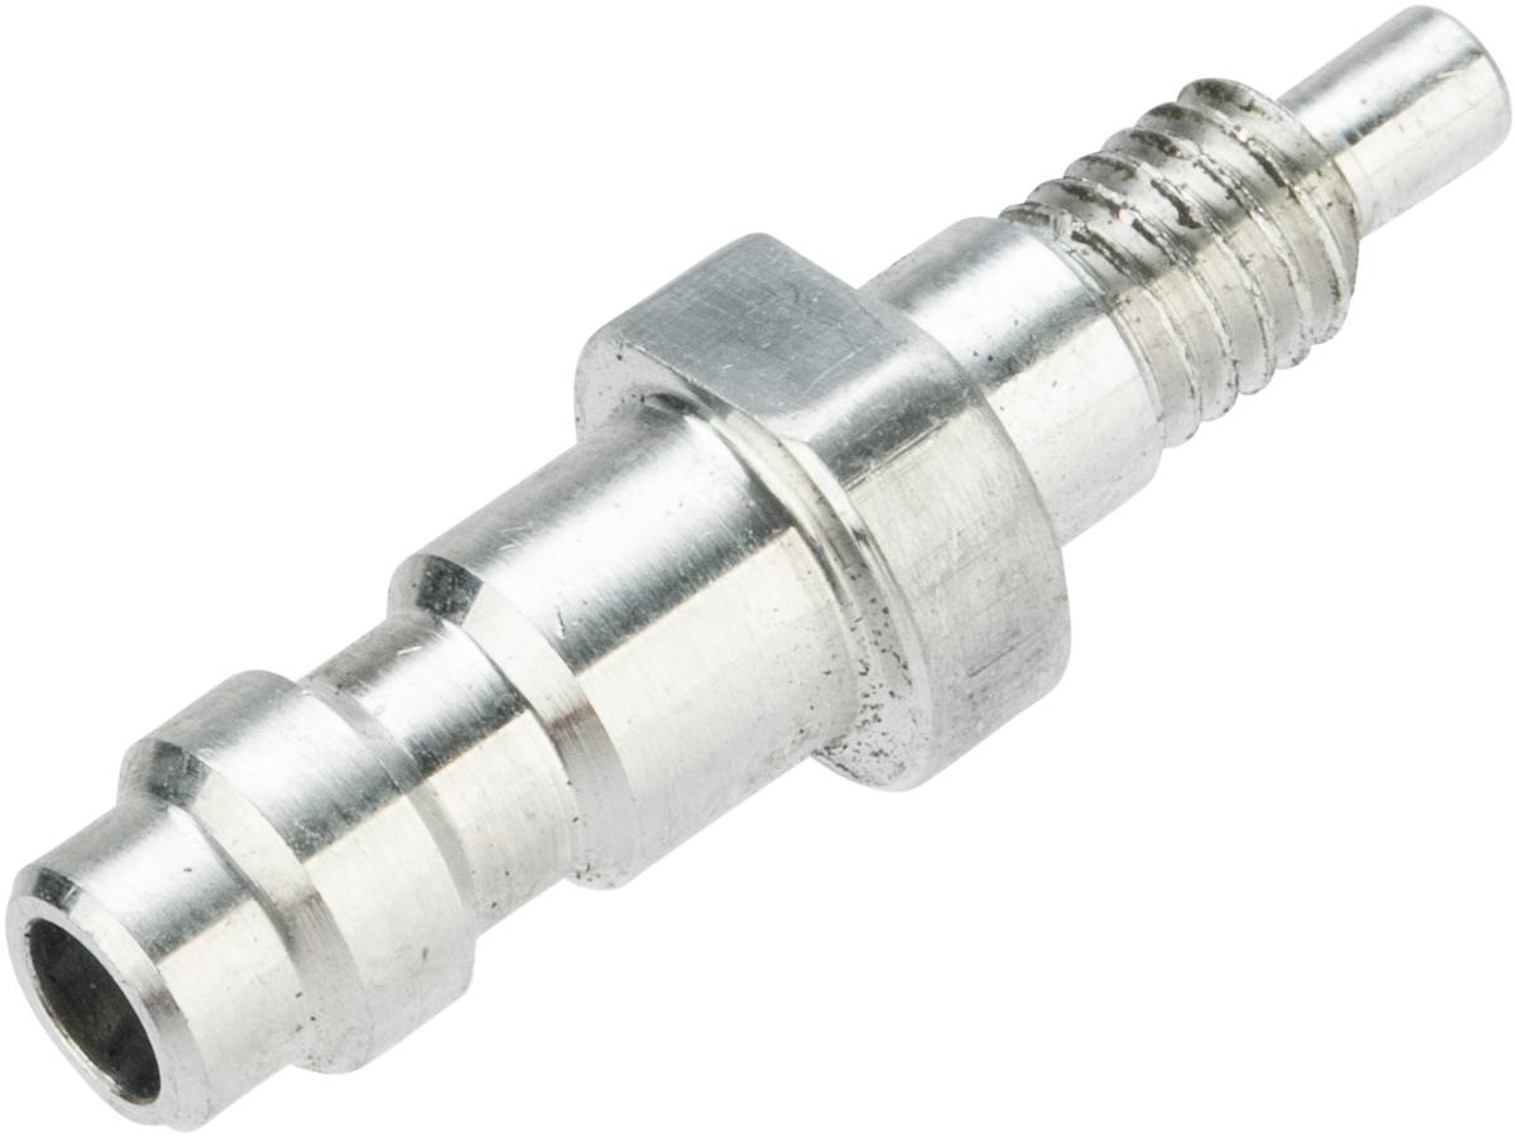 CQB Russian HPA Adapter Valve for JAG Scattergun